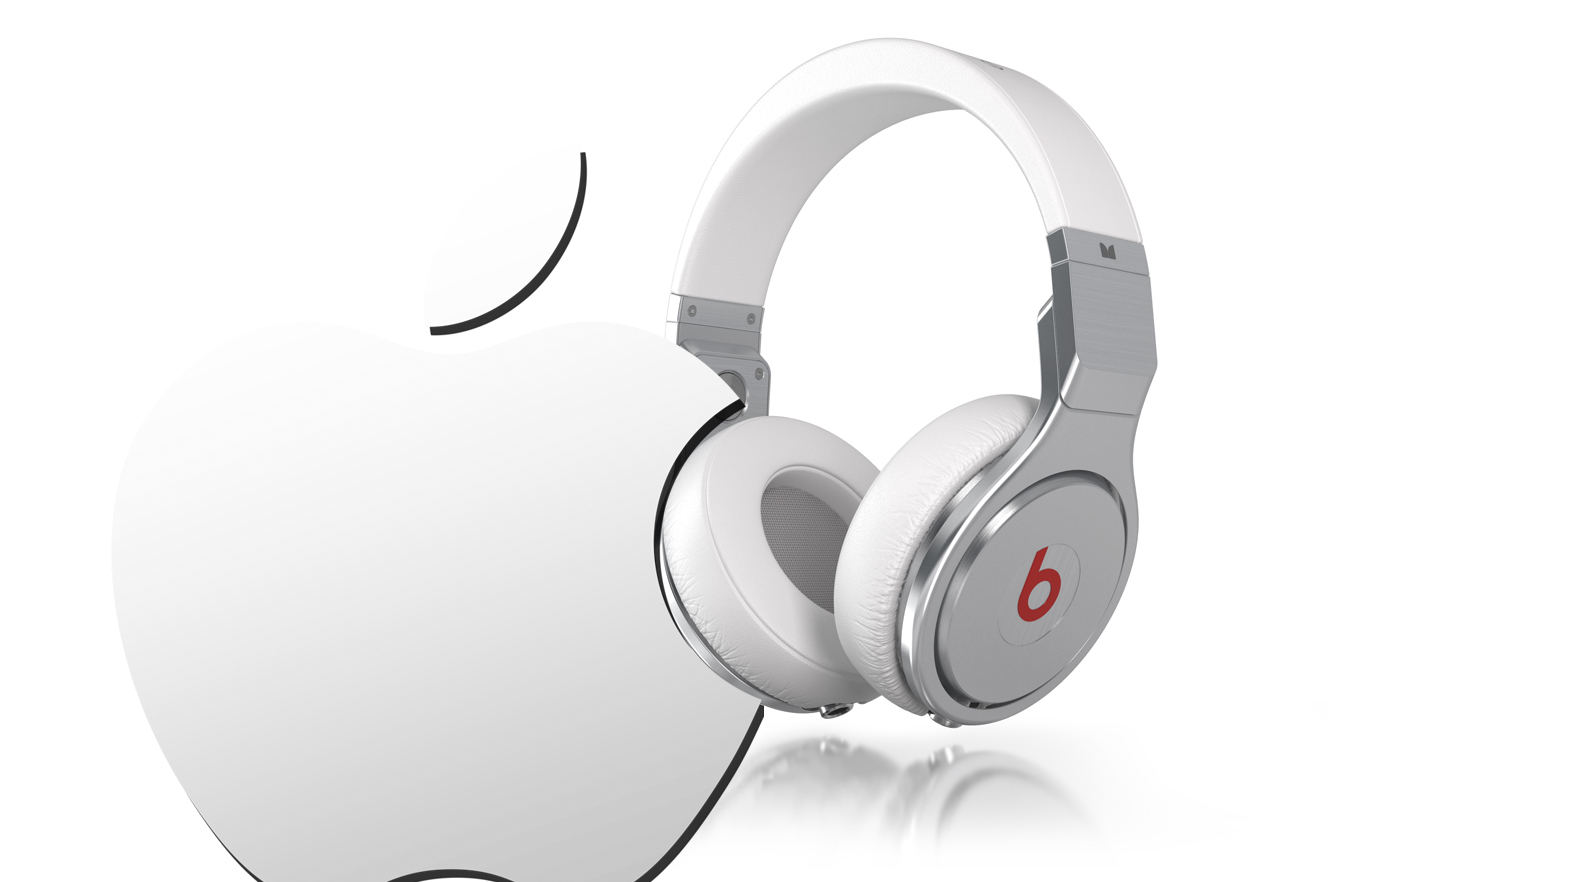 City of Beats download the new for apple